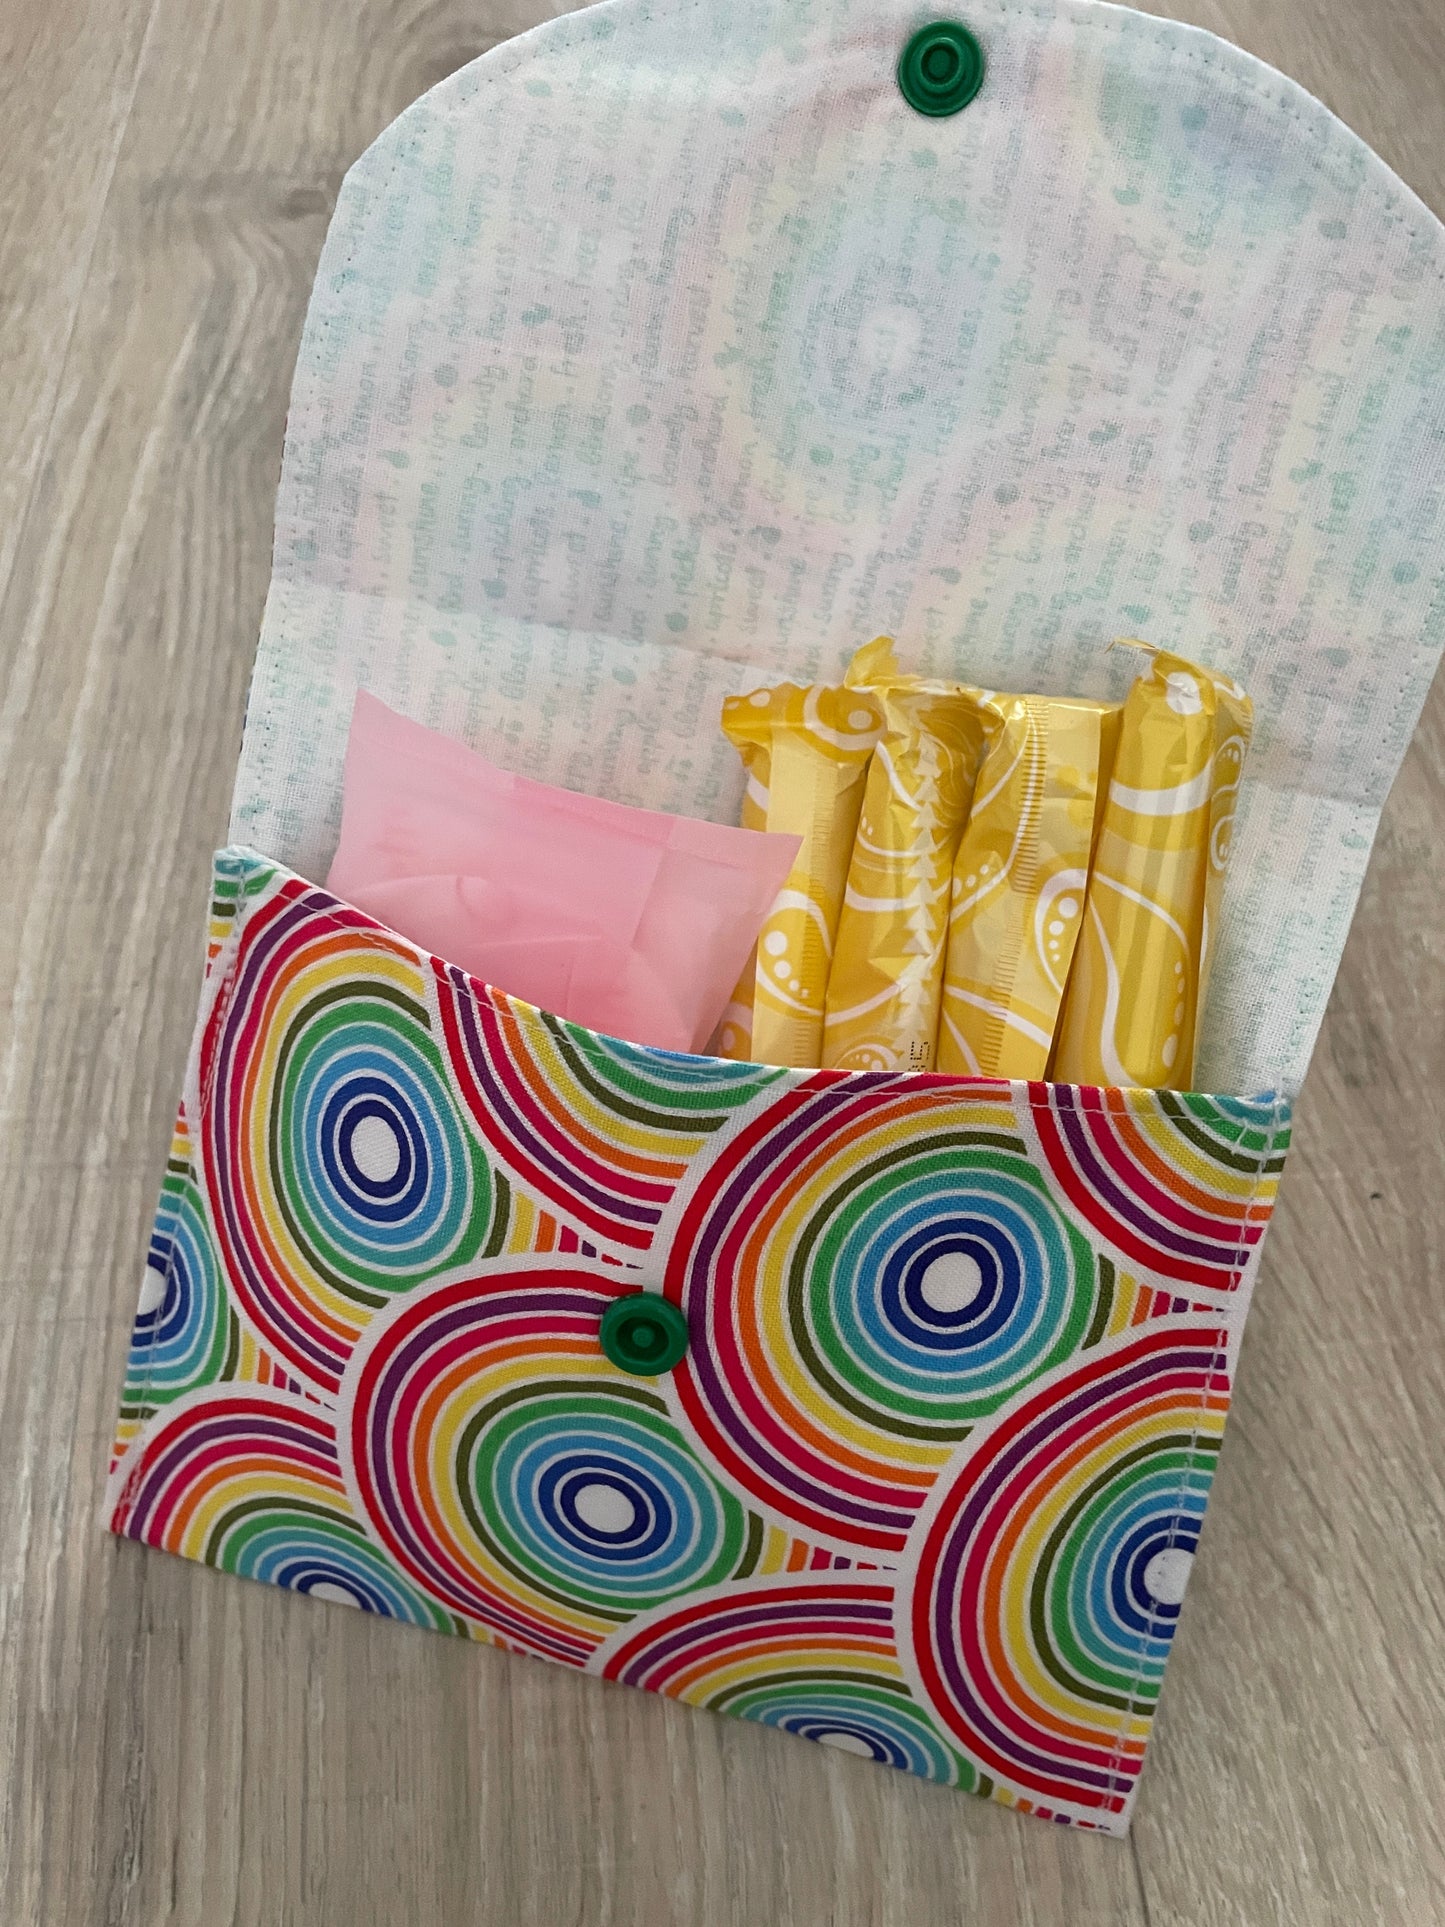 On-the-Go Essential: Cute Privacy Pouch for Tampons & Pads